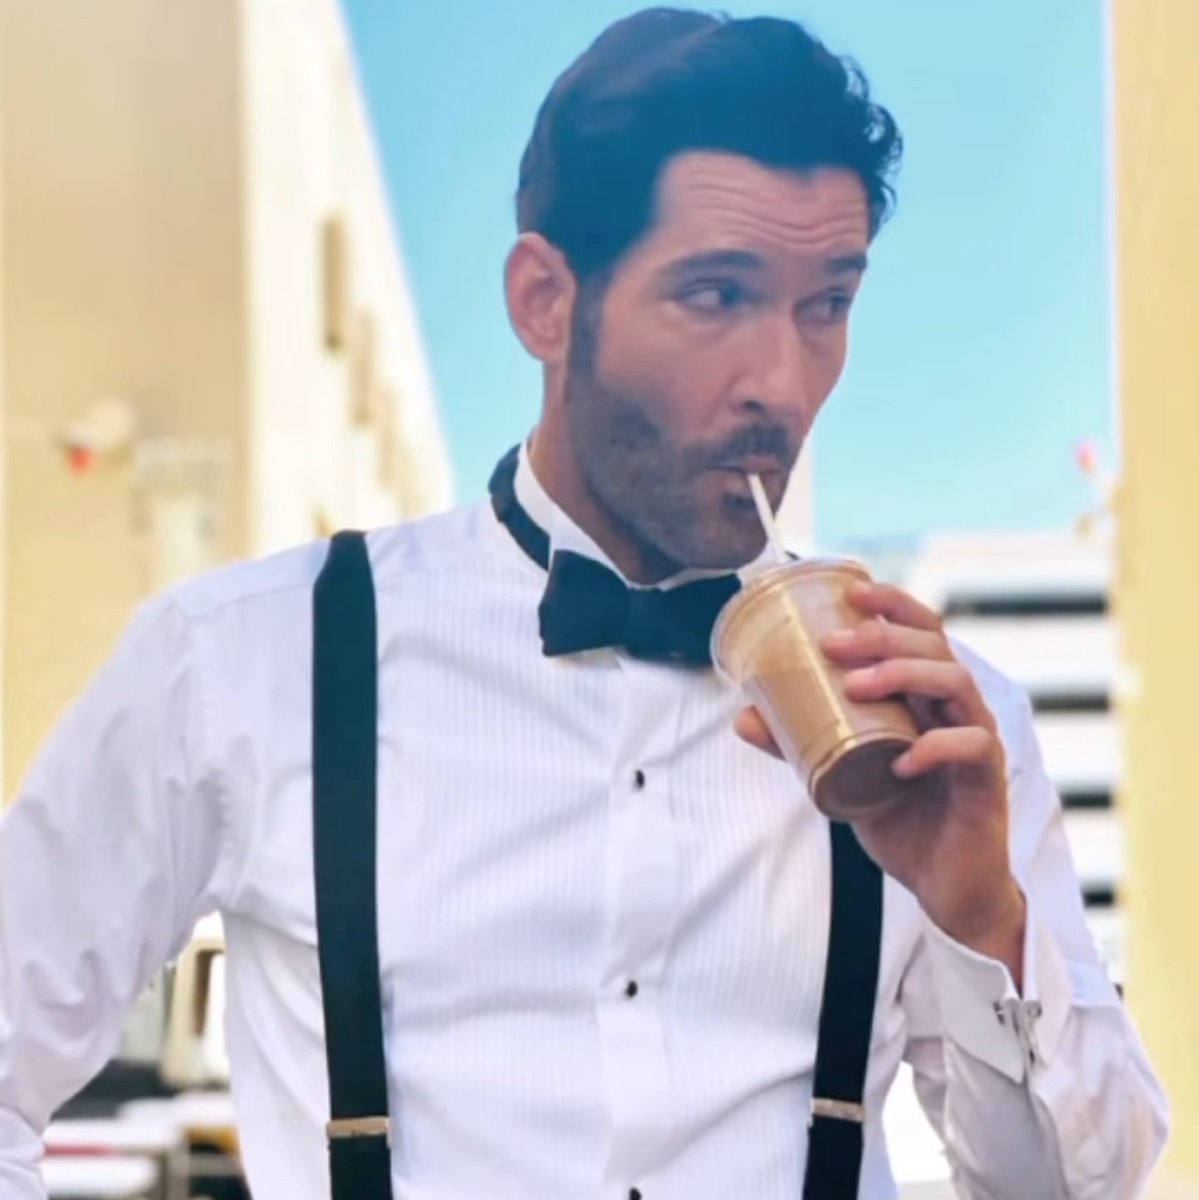 Tom Ellis aka Lucifer Morningstar as Cocktails A thread you didn't know you need but you actually do #TomEllis  #Lucifer